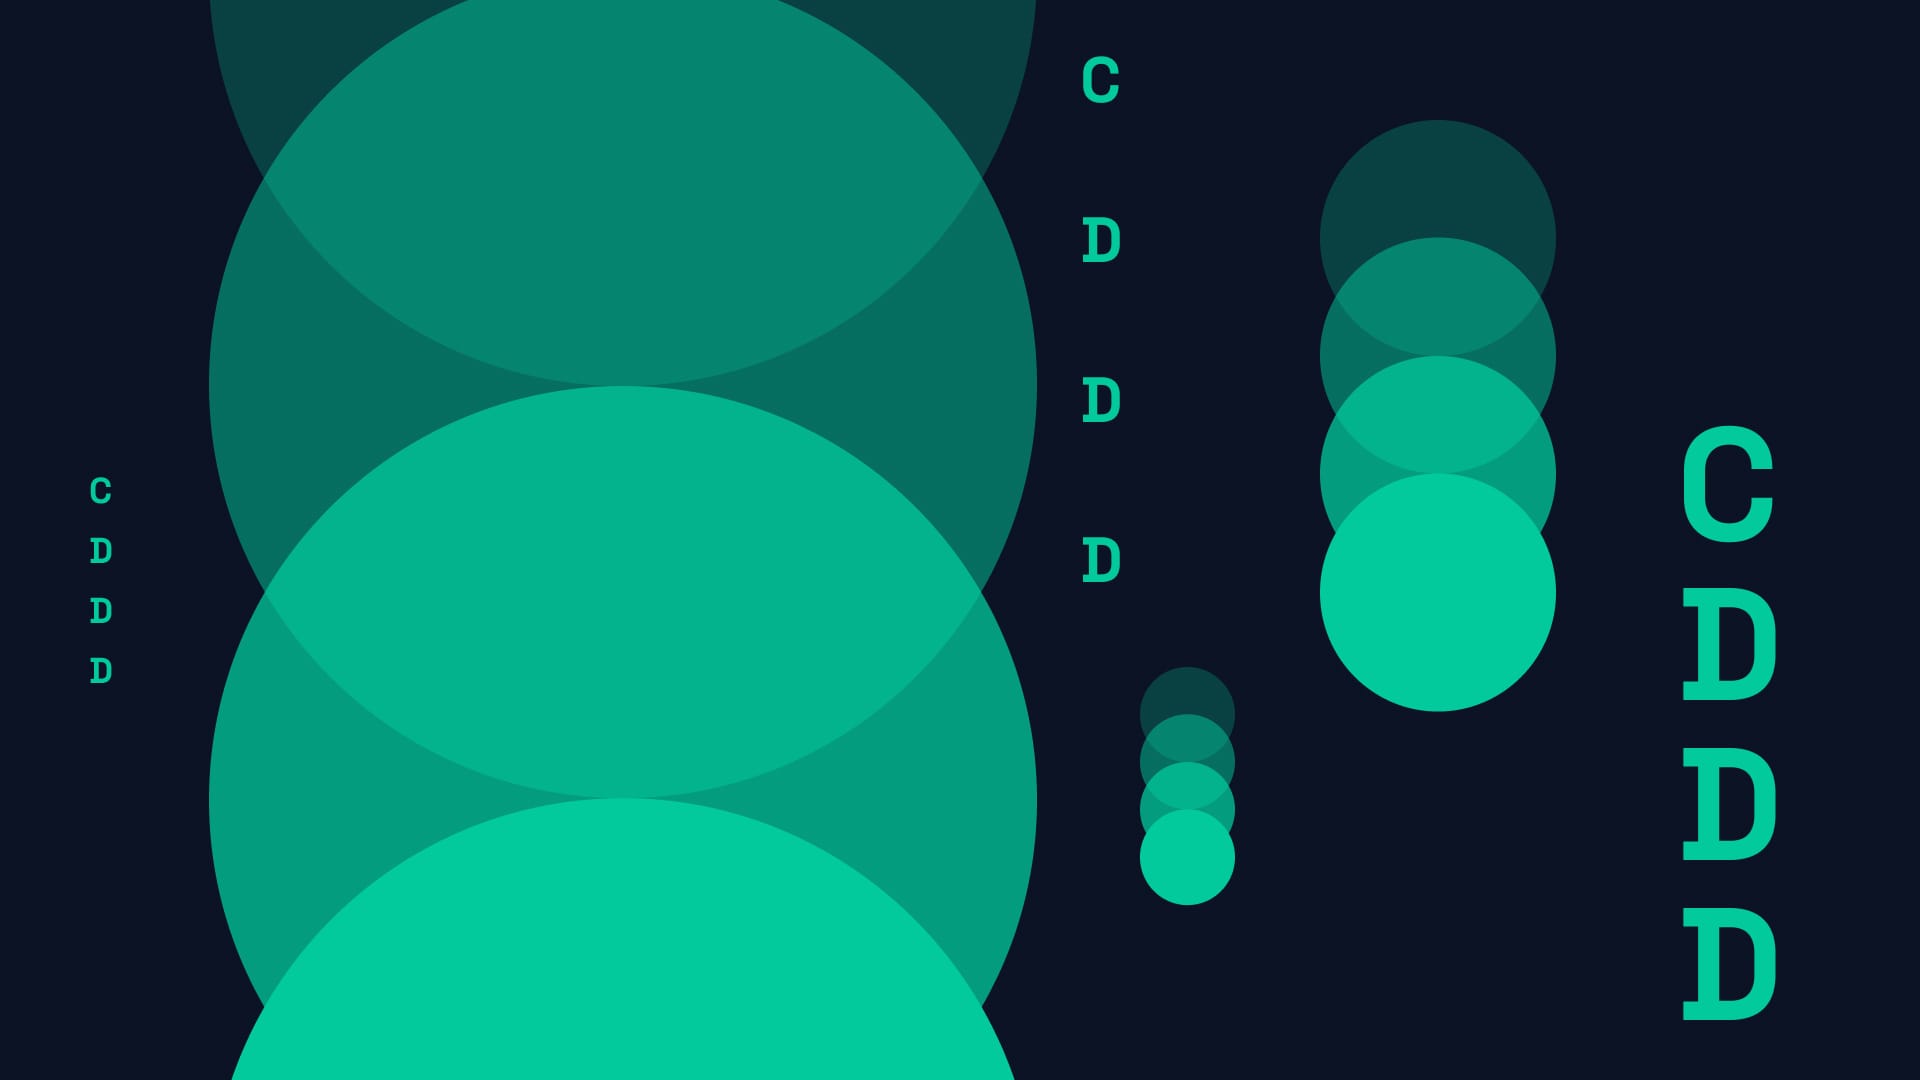 Abstract image for the CDDD event header